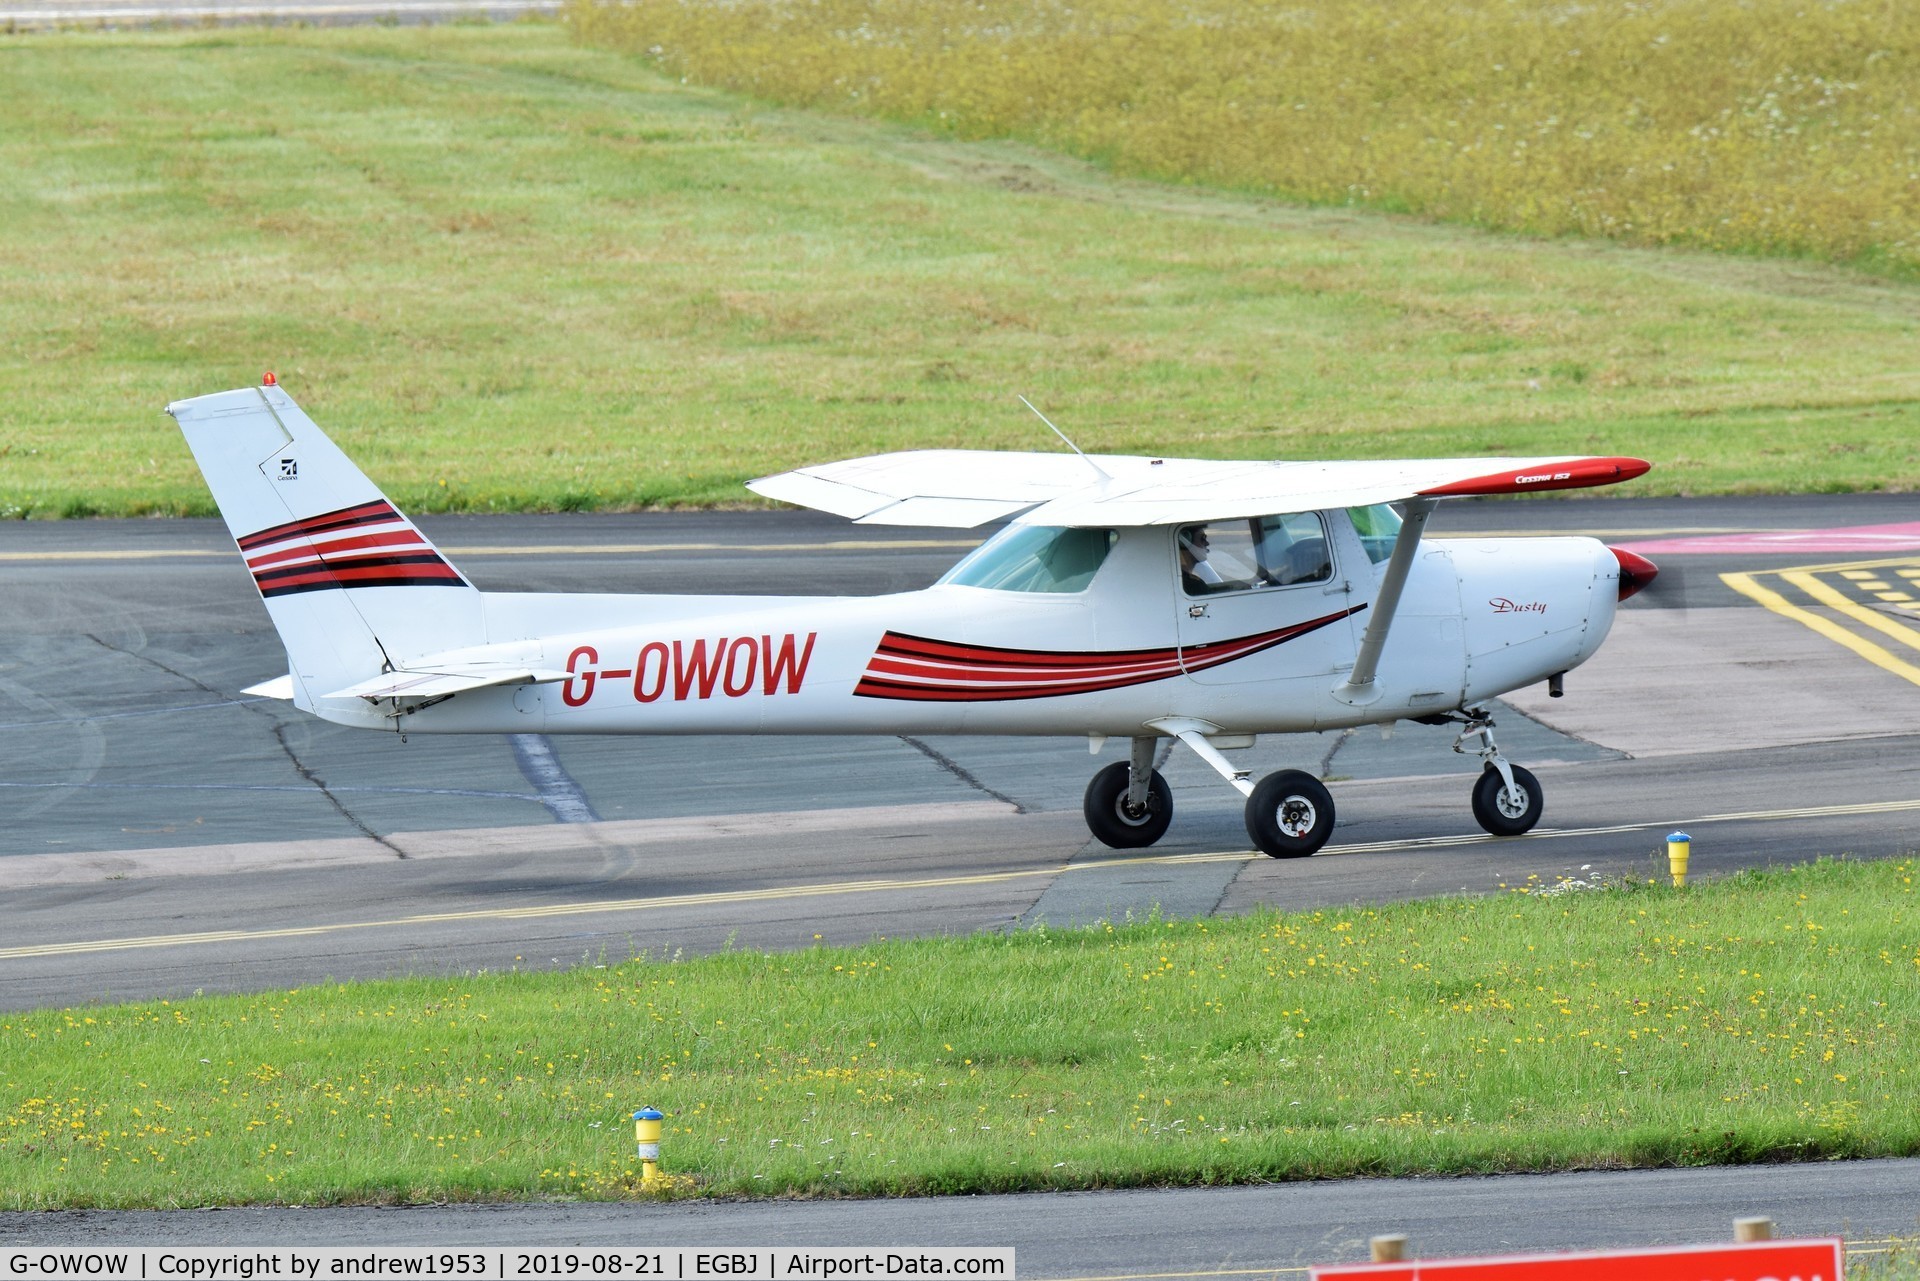 G-OWOW, 1979 Cessna 152 C/N 152-83199, G-OWOW at Gloucestershire Airport.